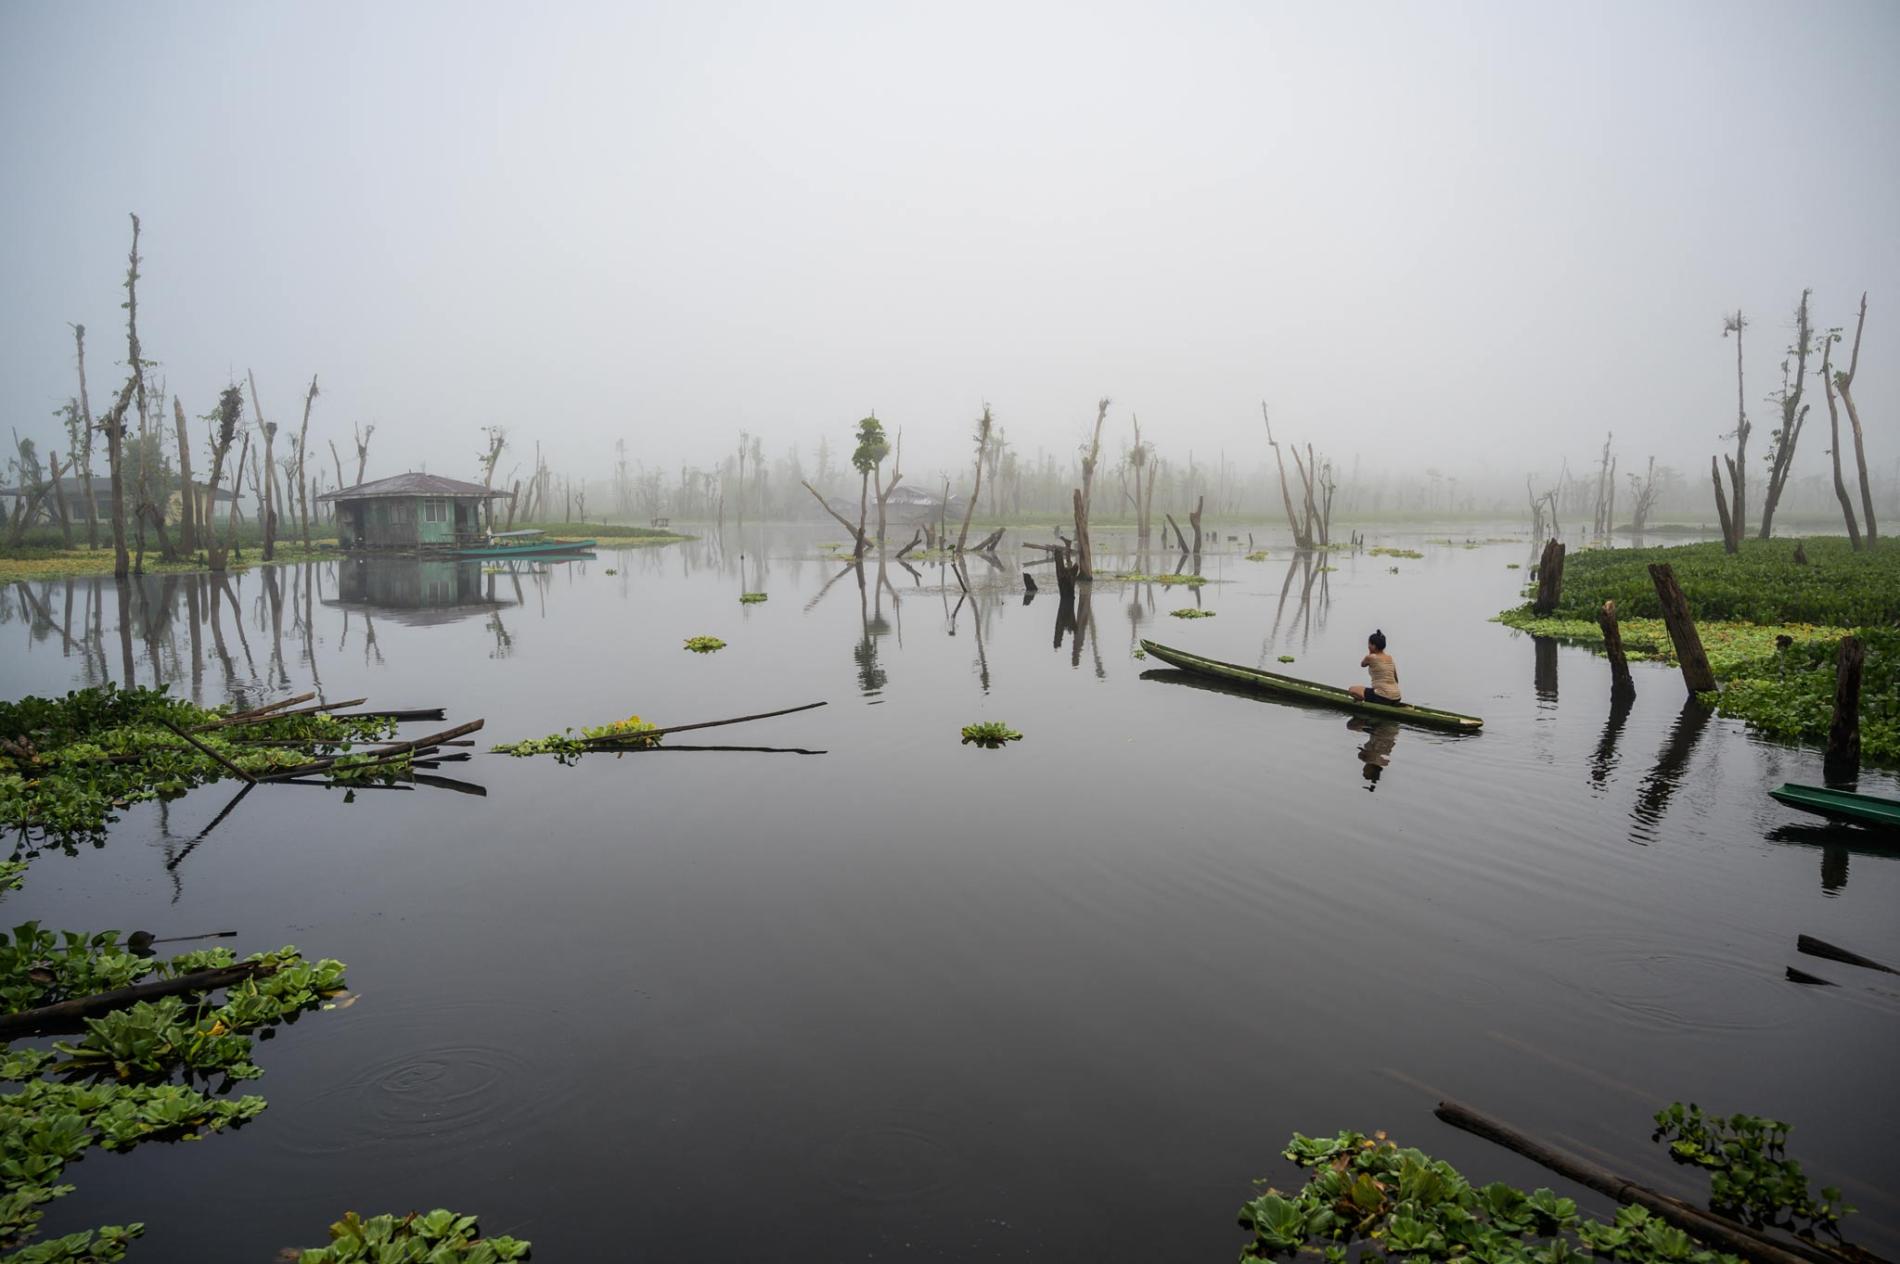 The world&rsquo;s wetlands are slipping away. This vibrant sanctuary underscores the stakes.